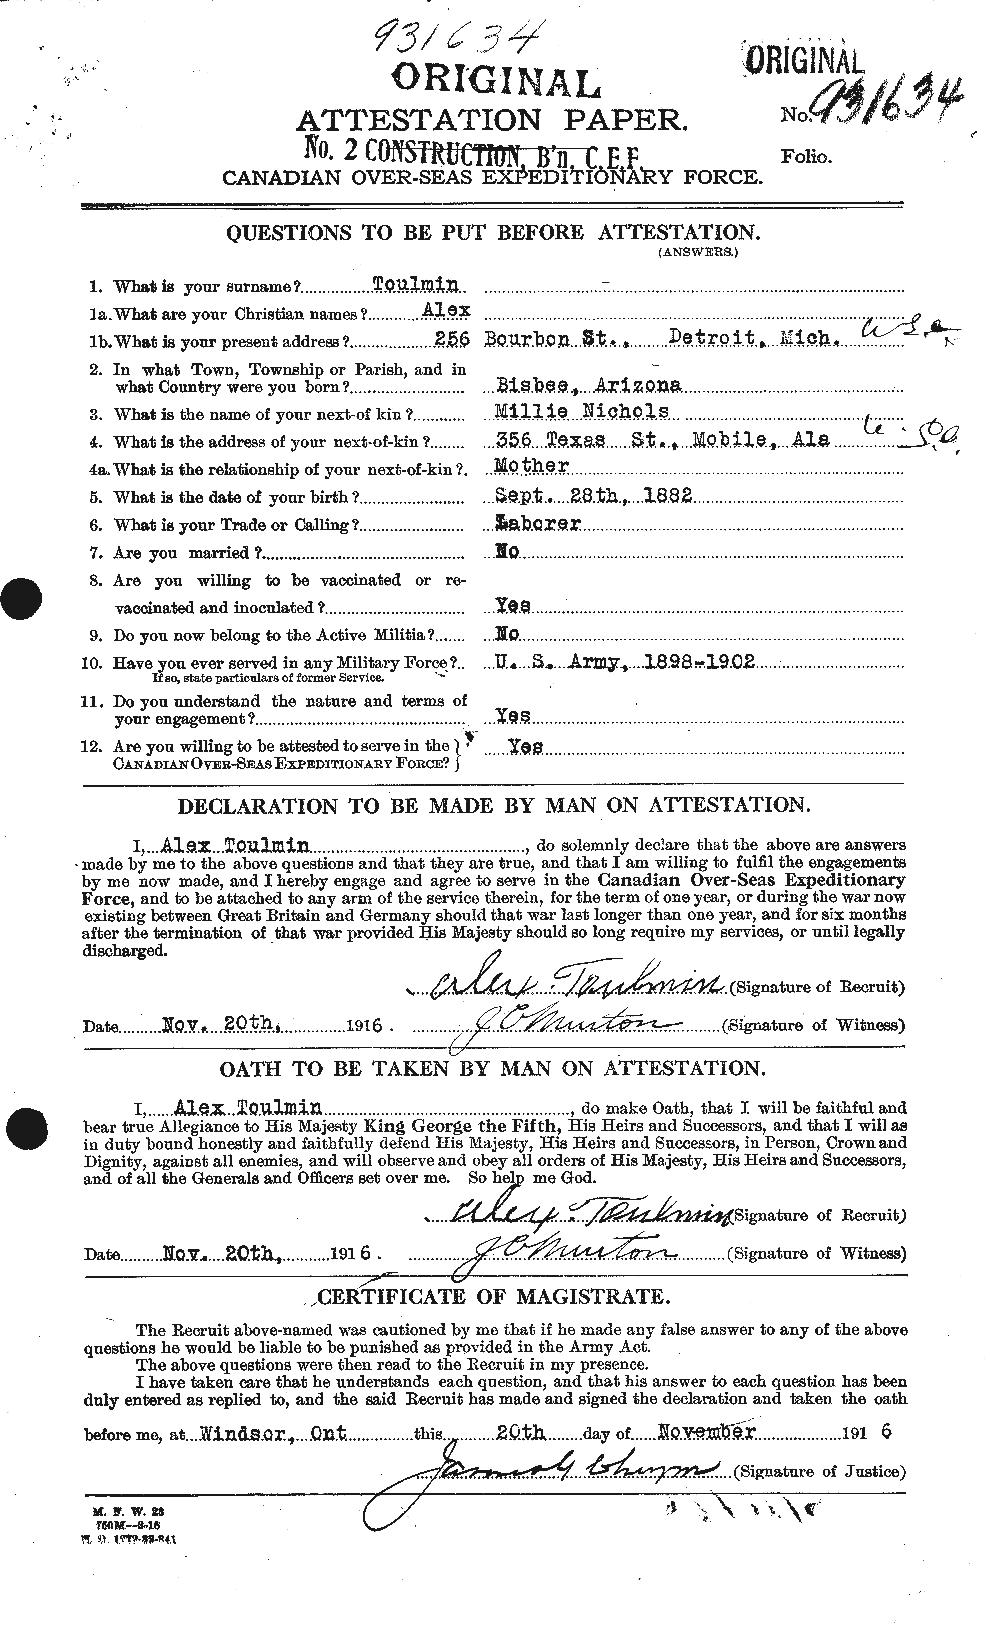 Personnel Records of the First World War - CEF 650180a